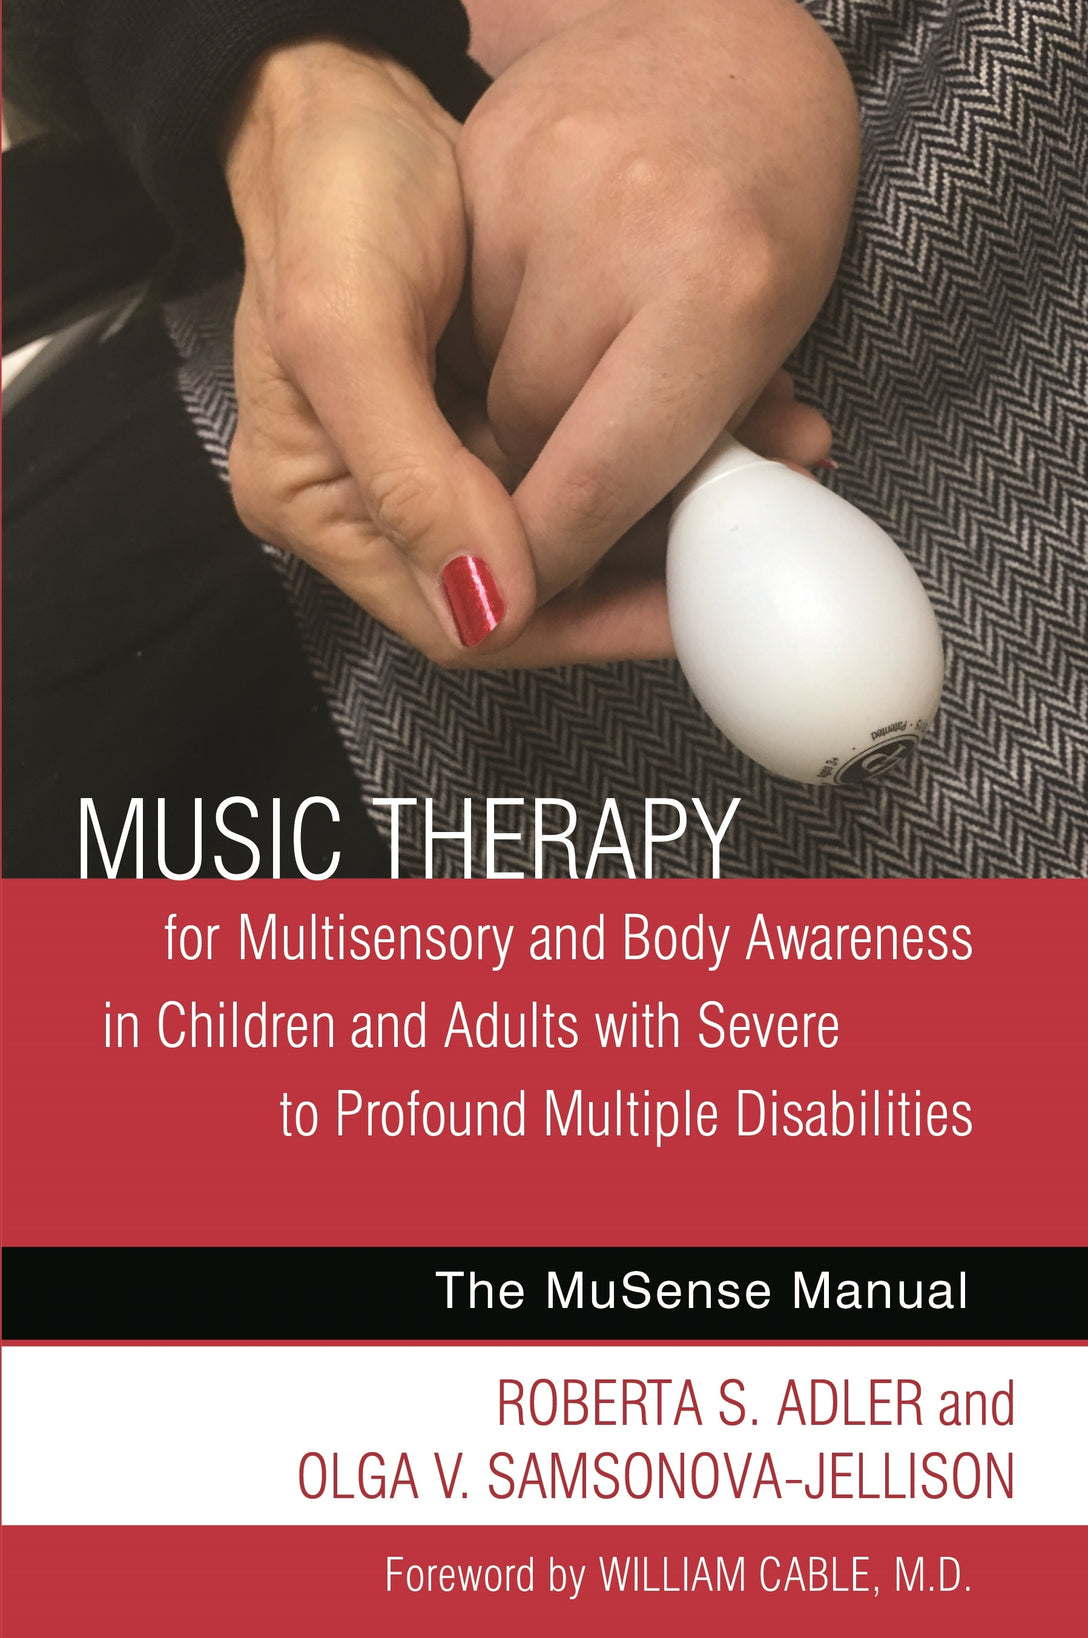 Music Therapy for Multisensory and Body Awareness in Children and Adults with Severe to Profound Multiple Disabilities by Roberta S. Adler, Olga V. Samsonova-Jellison, William Cable